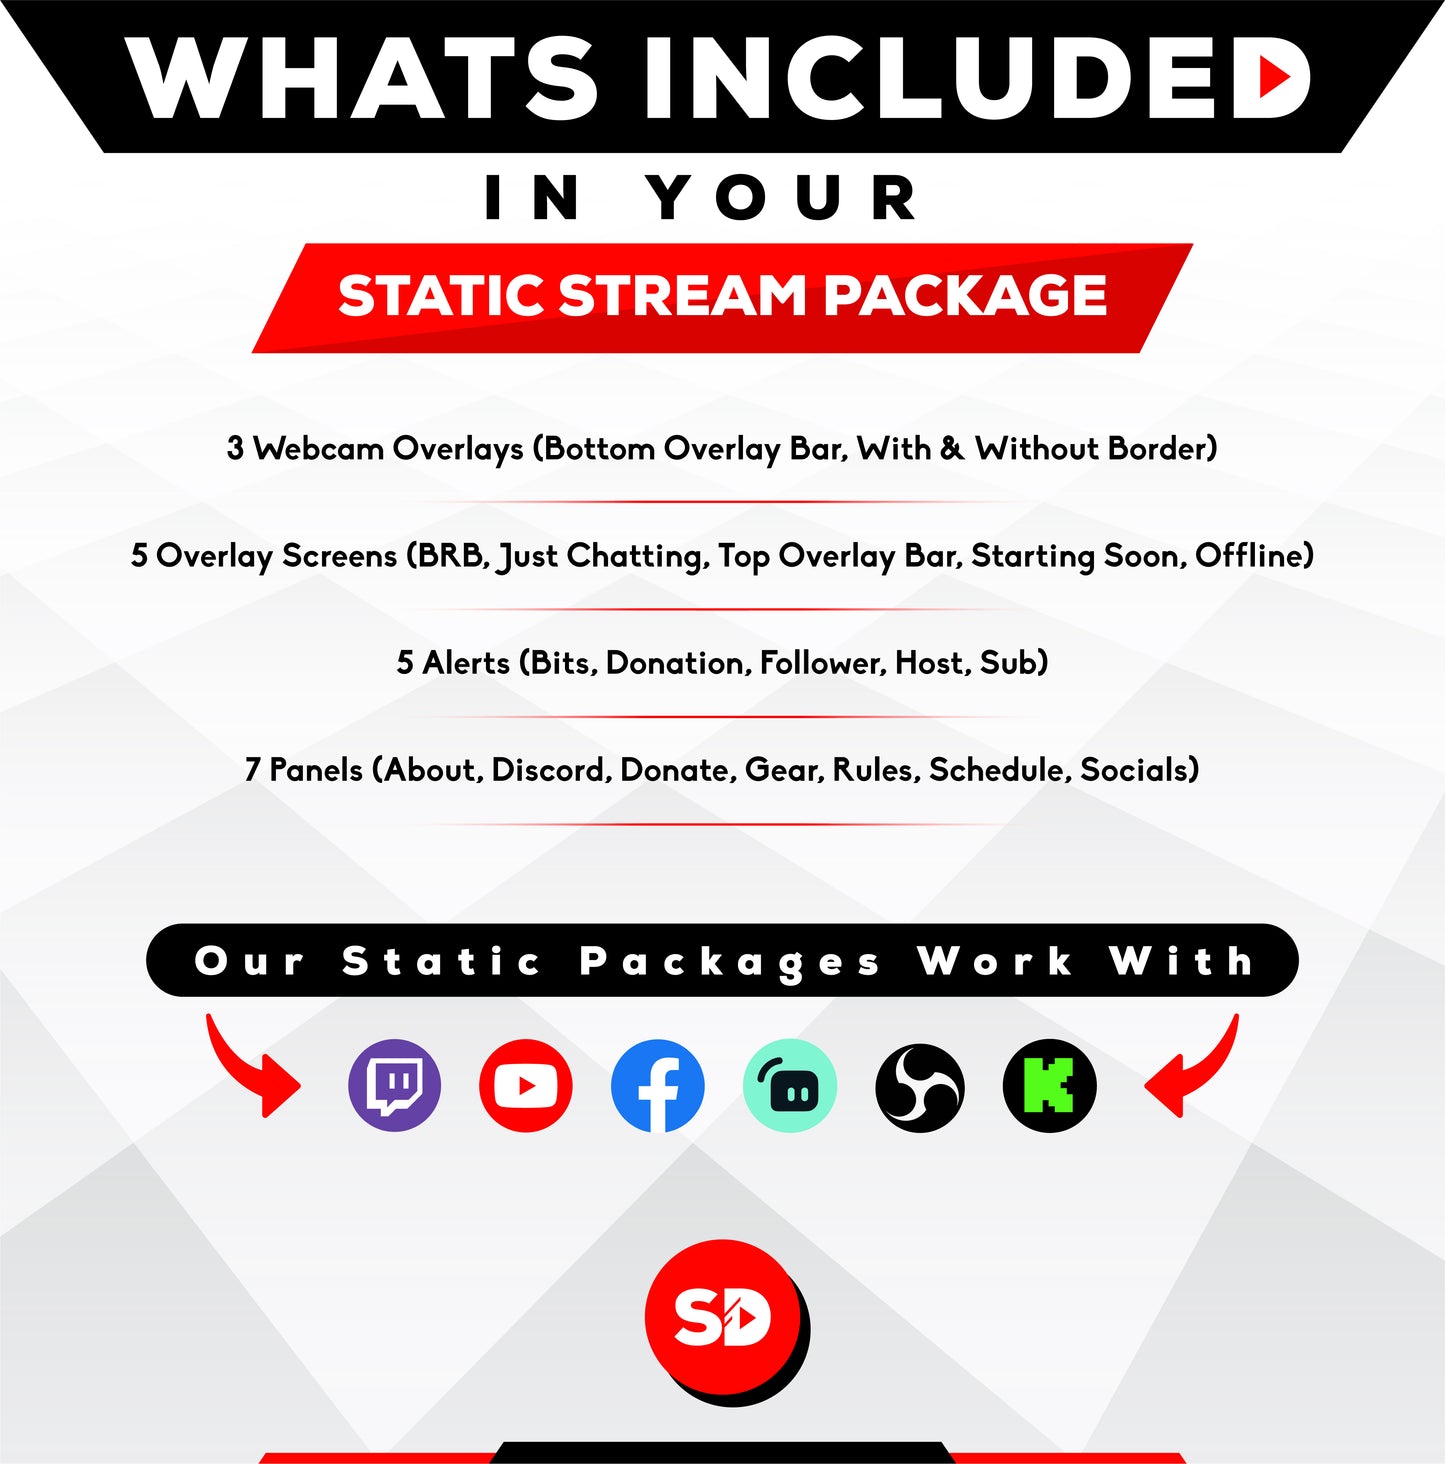 whats included in your package - static stream overlay package - monochrome - stream designz